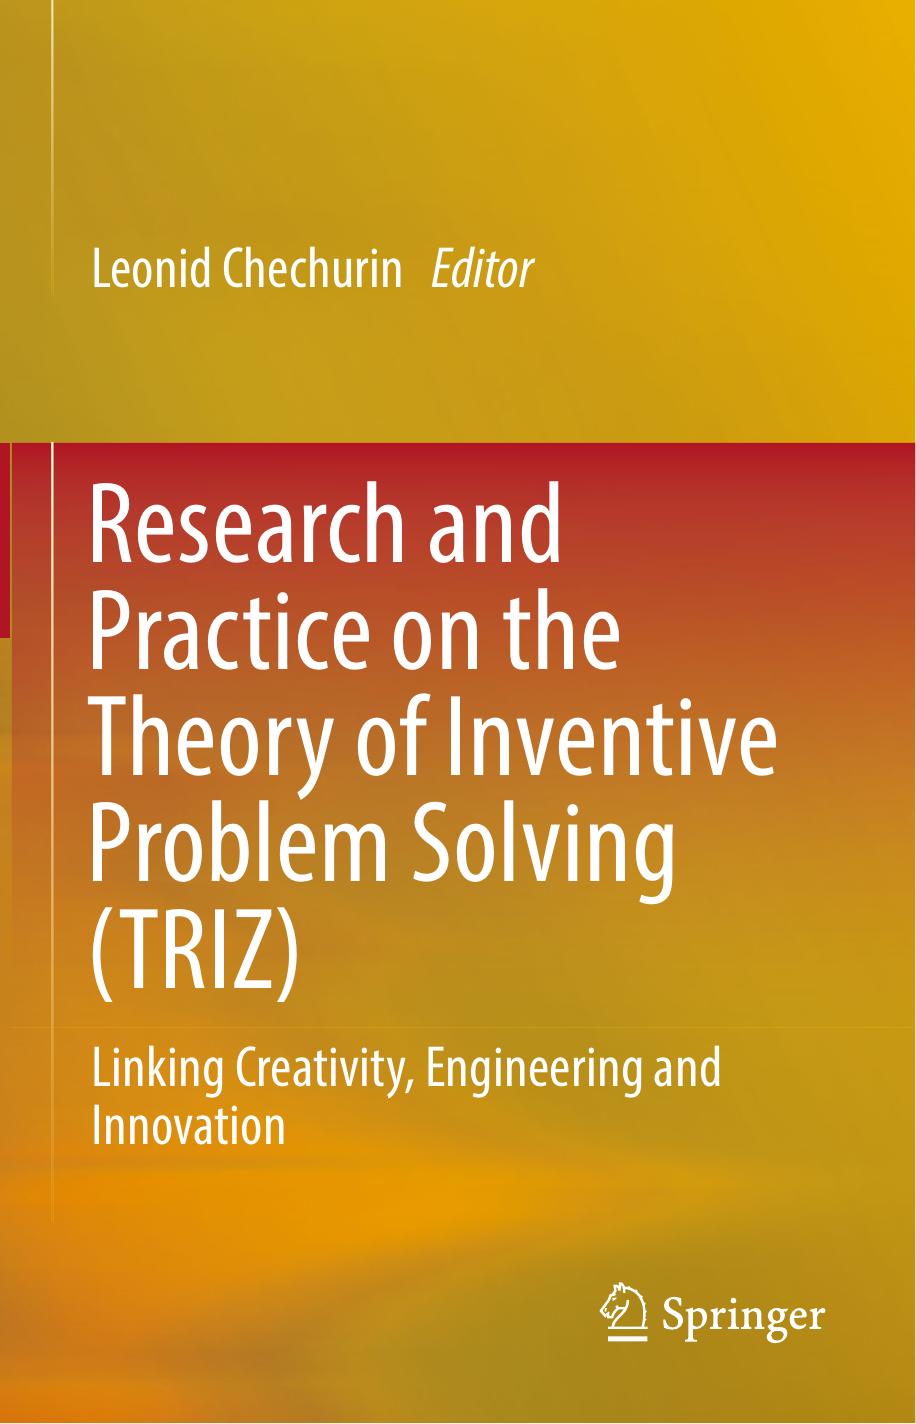 Research and Practice on the Theory of Inventive Problem Solving : Linking Creativity, Engineering and Innovation